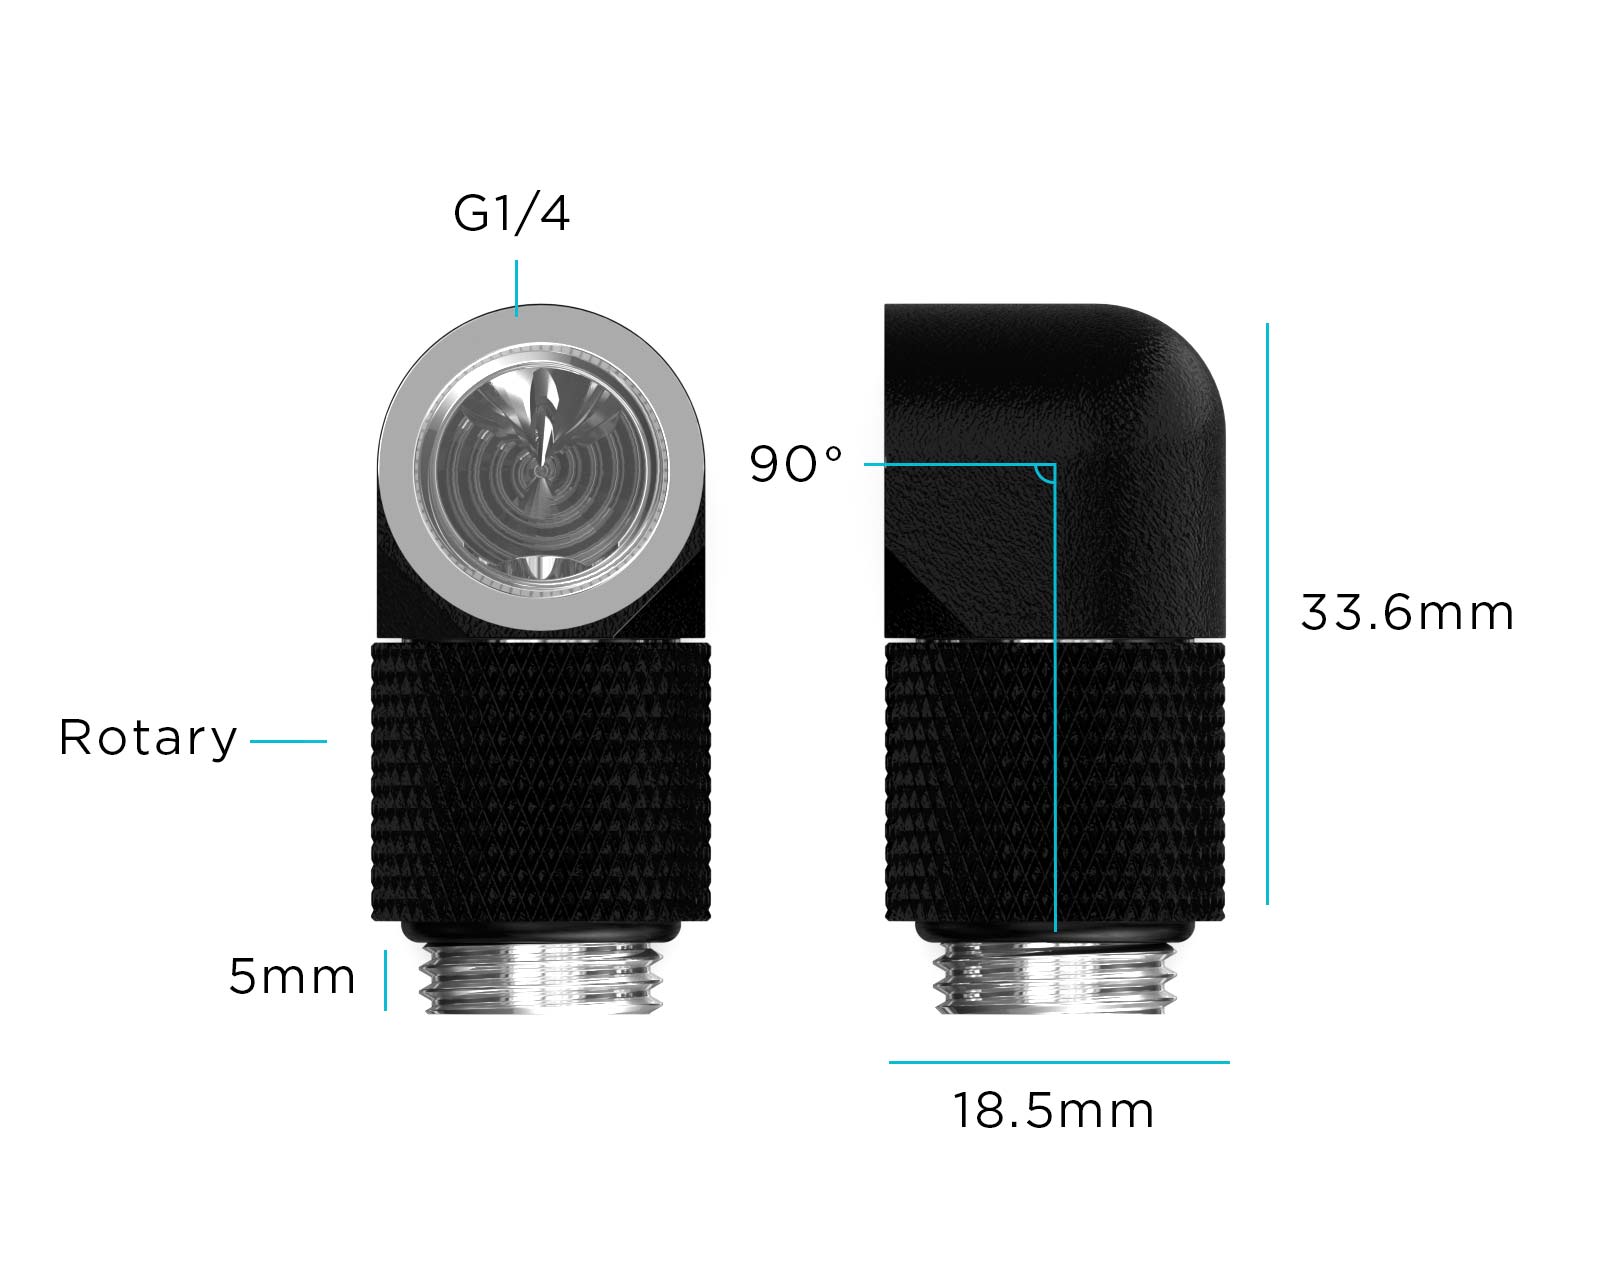 PrimoChill Male to Female G 1/4in. 90 Degree SX Rotary 15mm Extension Elbow Fitting - PrimoChill - KEEPING IT COOL